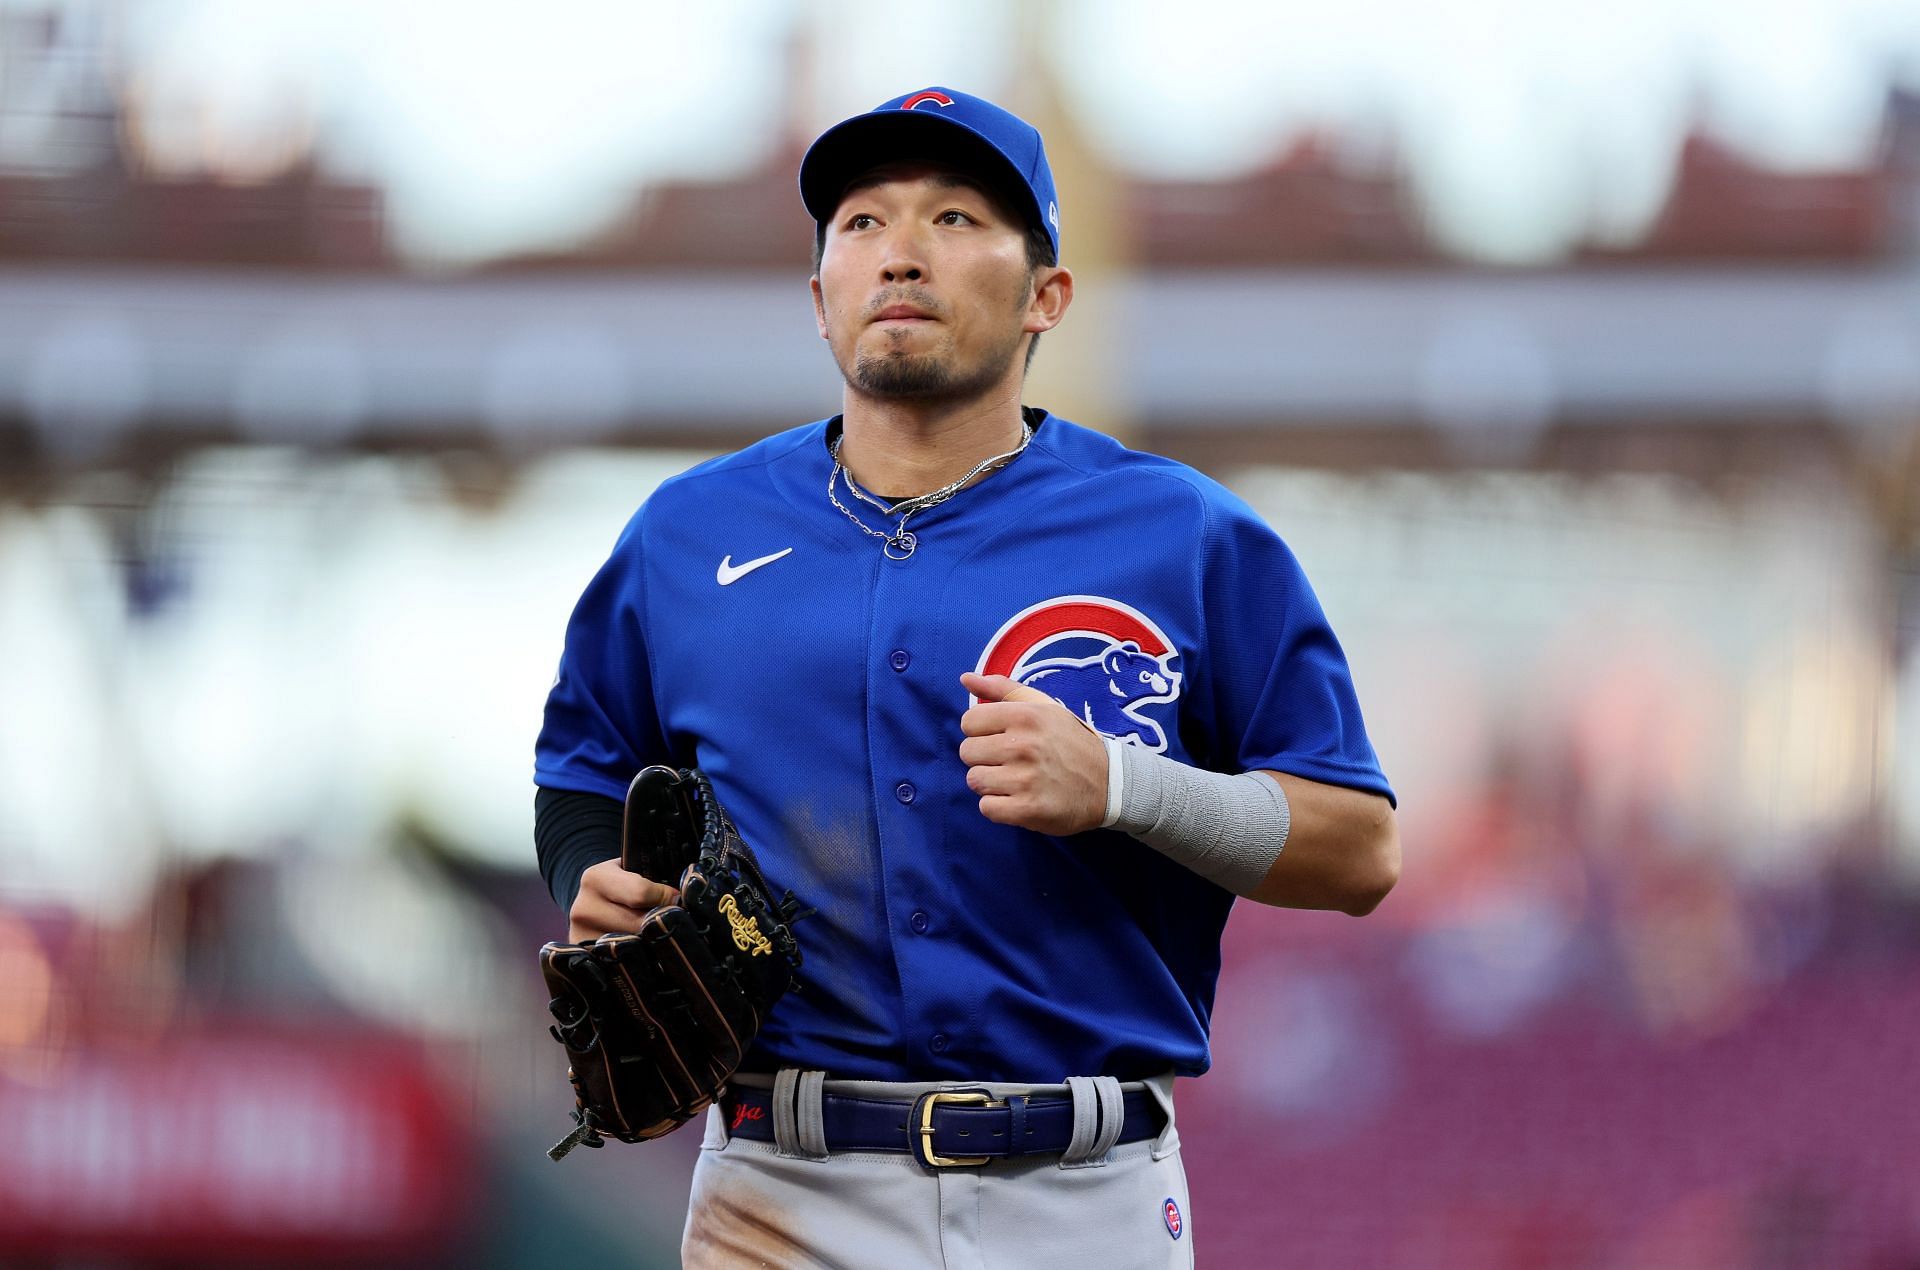 Chicago Cubs fans excited as outfielder Seiya Suzuki expected back with the  team for Friday's game: Seiya real soon The season starts now